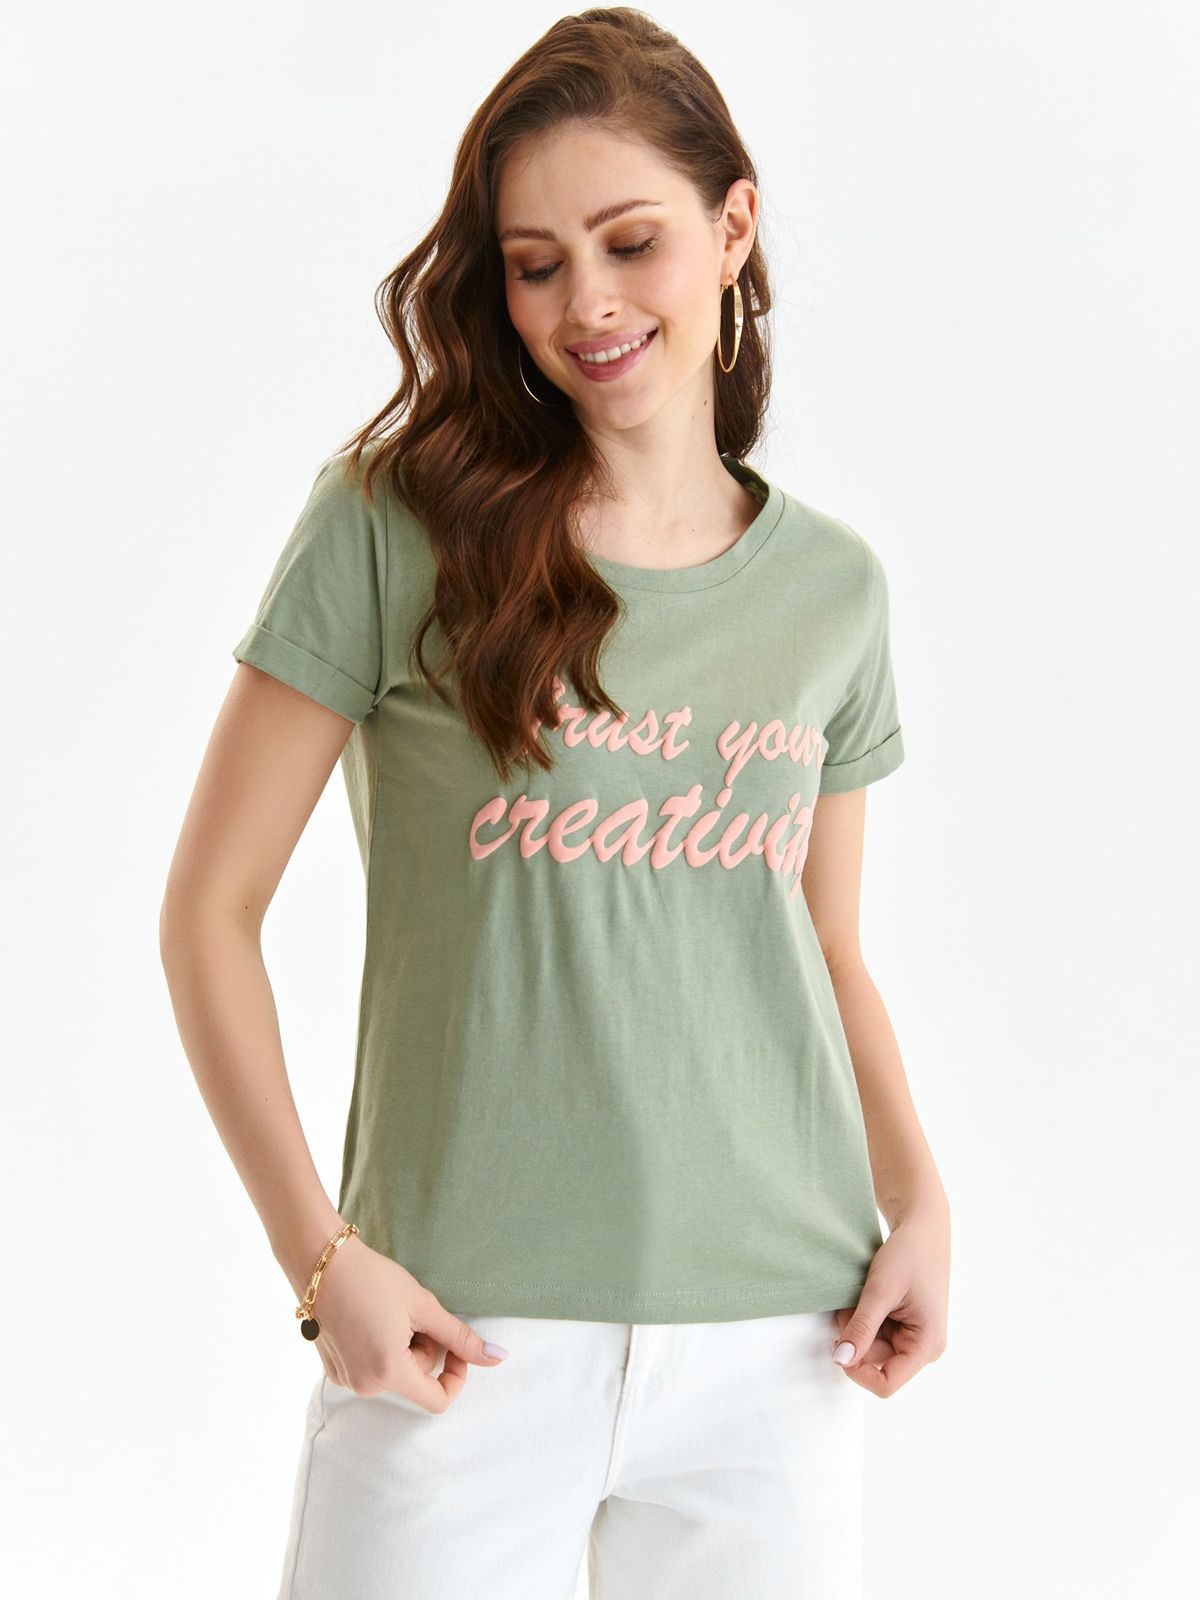 Khaki t-shirt cotton loose fit with rounded cleavage